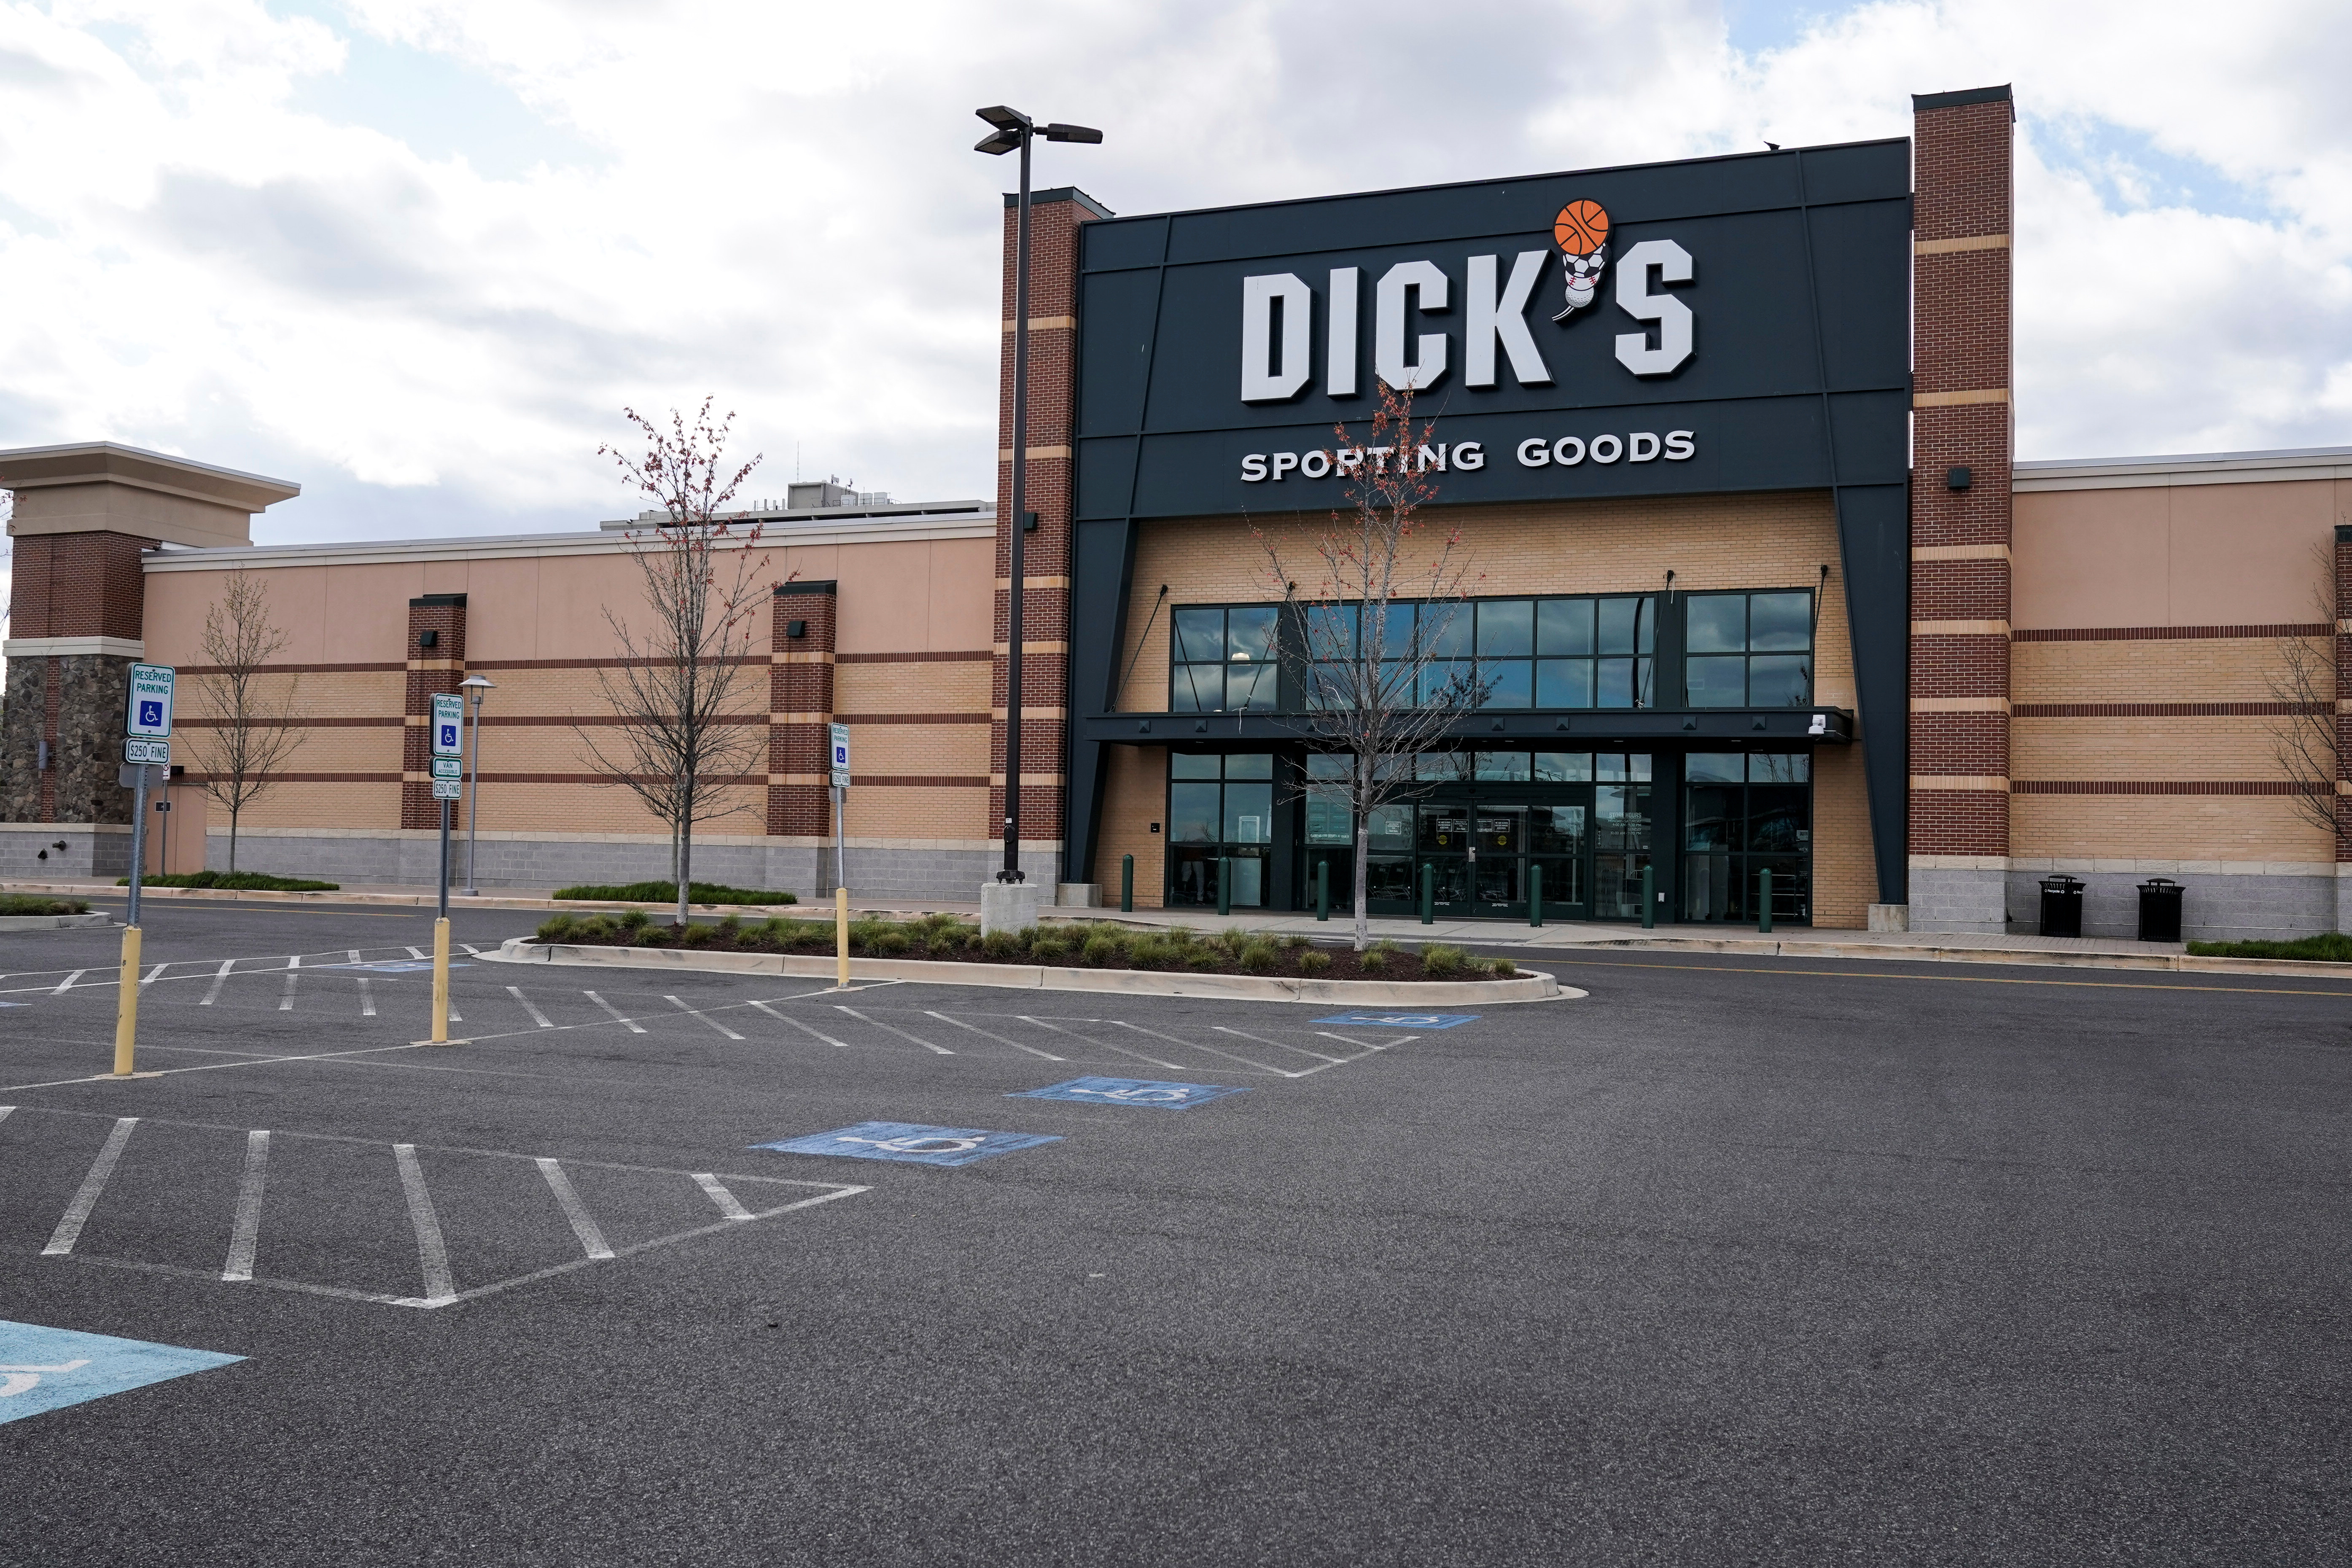 A Dick's Sporting Goods store is closed due to the outbreak of coronavirus in Washington